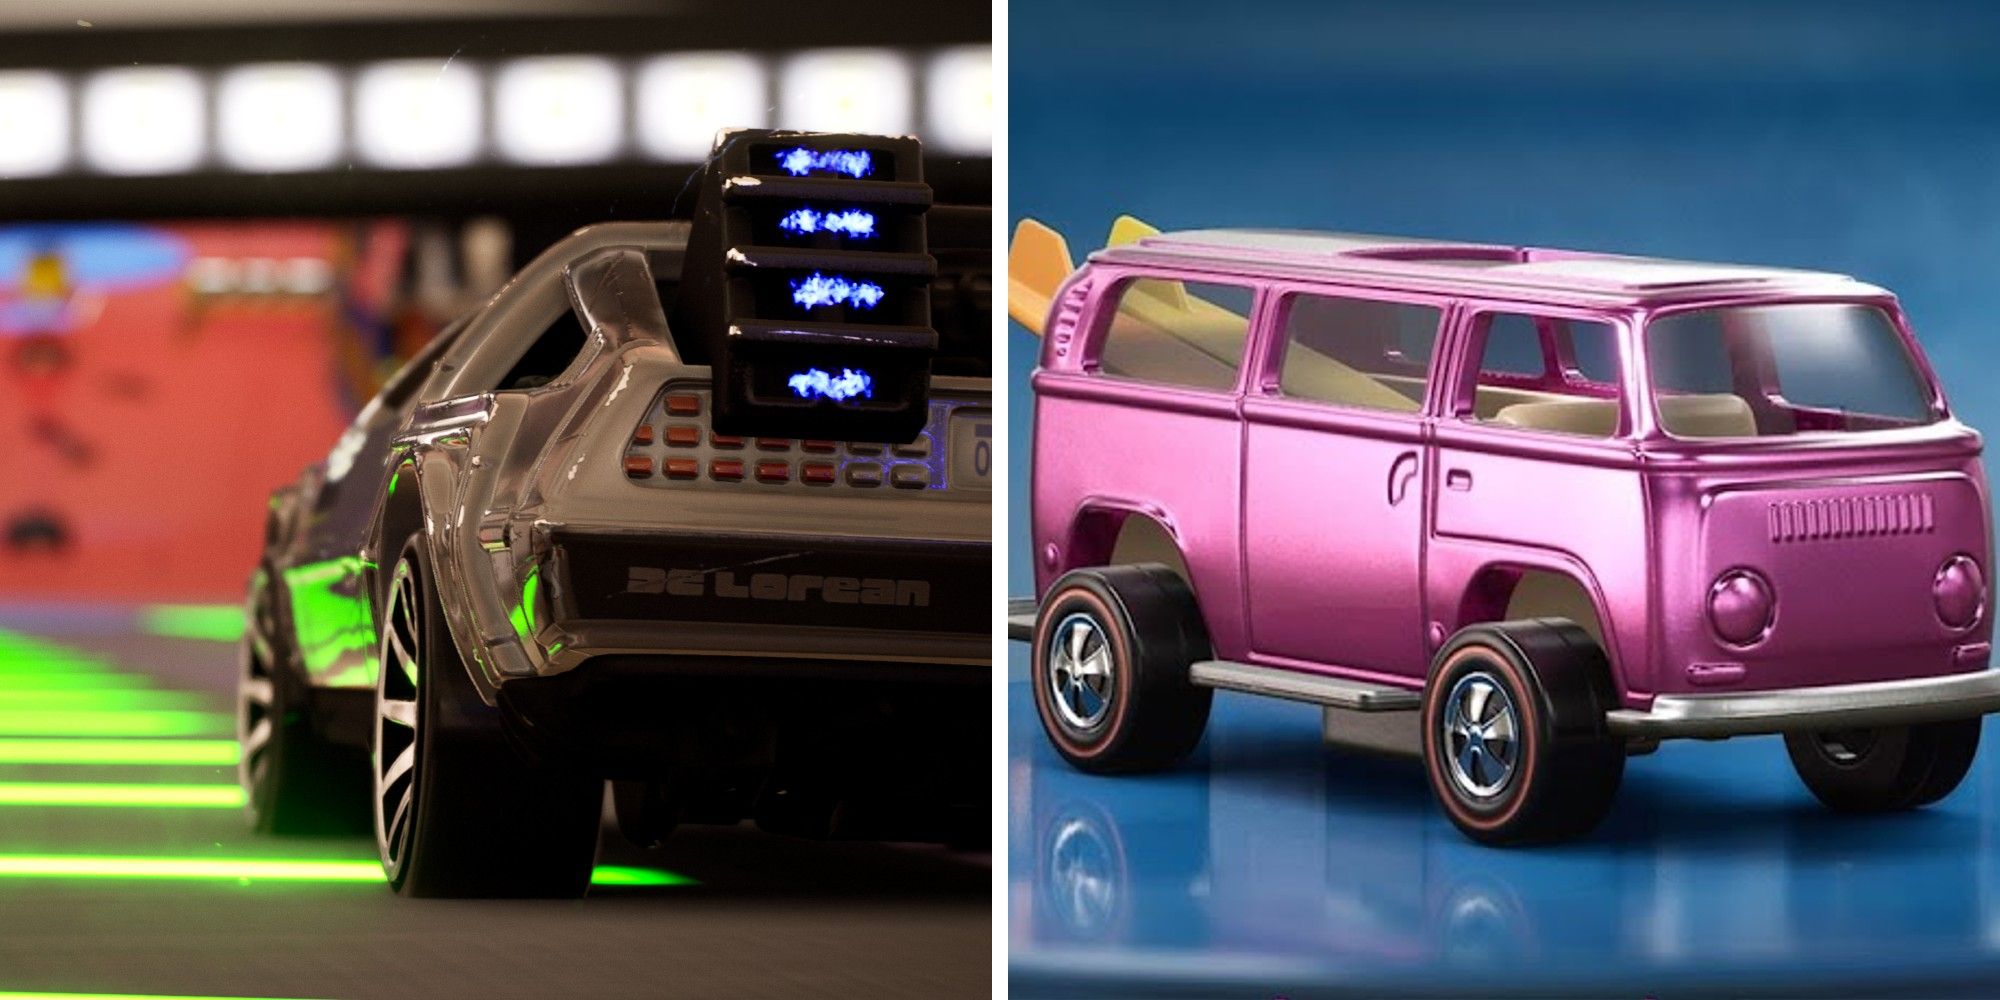 Hot Wheels Unleashed Back to the Future Time Machine on the left and rare Volkswagen Beach Bomb on the right